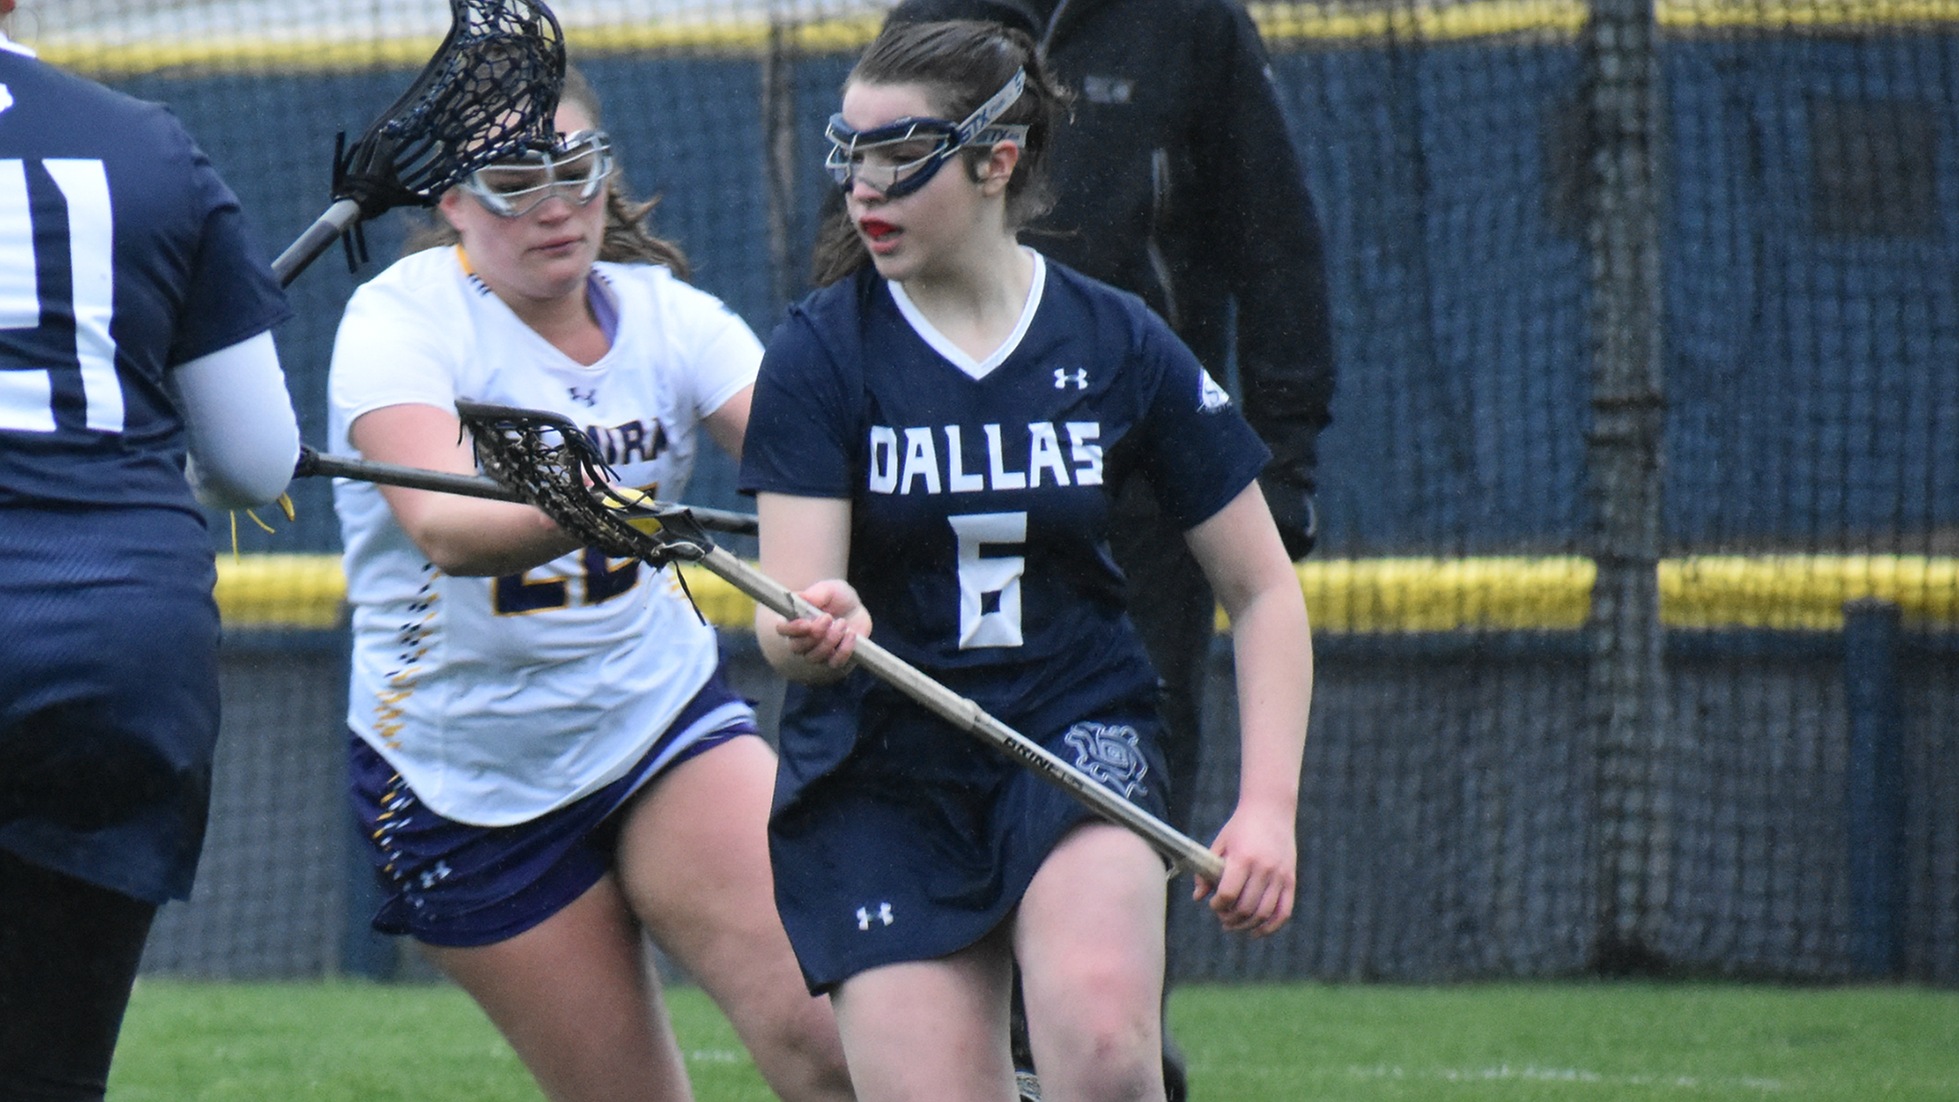 PREVIEW: UD Women's Lacrosse Hosts Berry College on Wednesday (3/11)